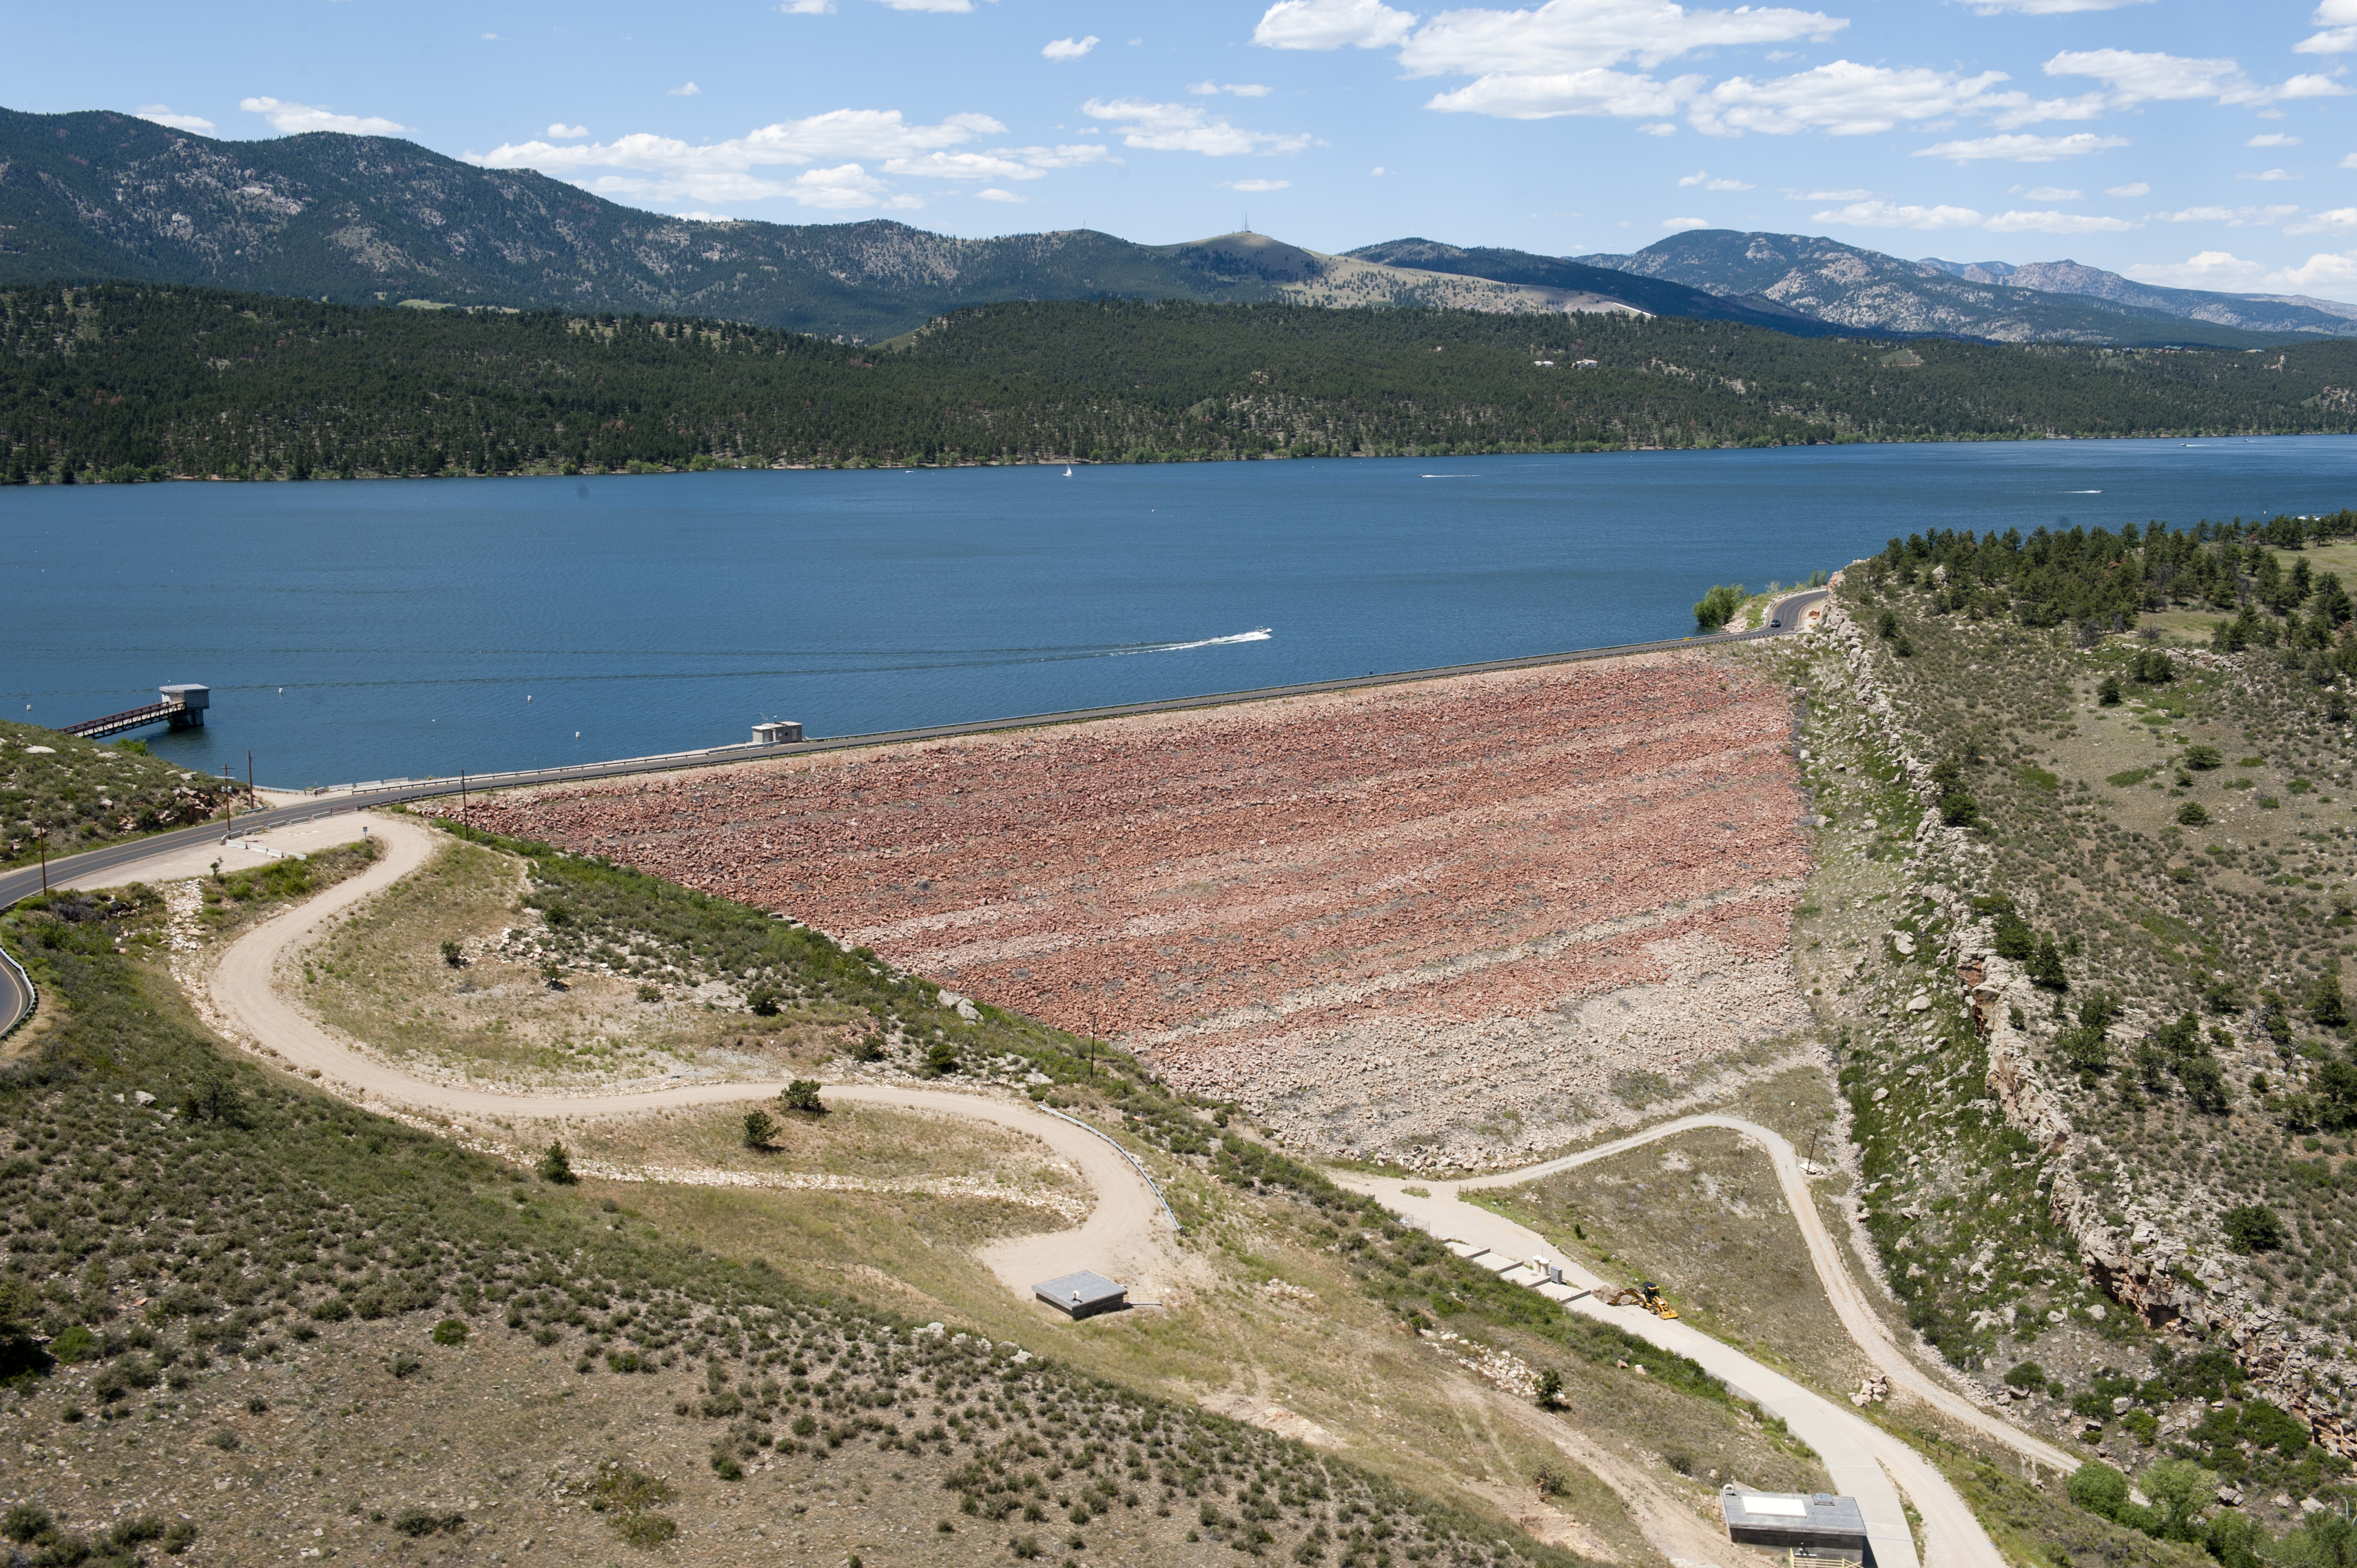 Horsetooth Reservoir and Dixon Dam in summer with Rocky Mountains in the far background.